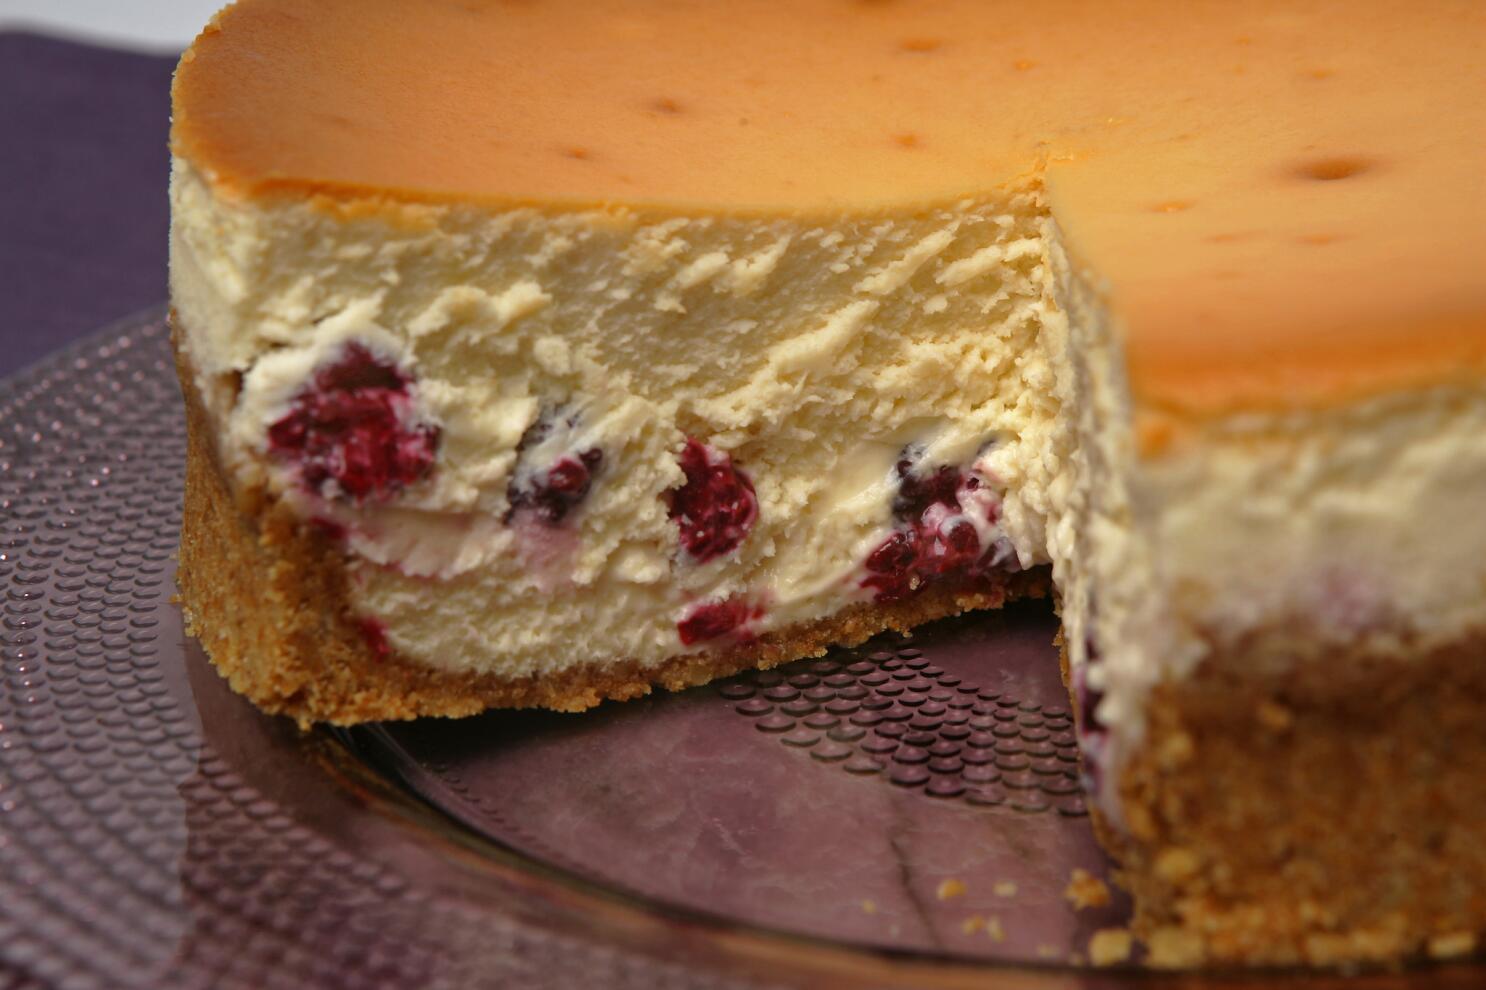 Tall and Creamy Cheesecake Recipe - NYT Cooking